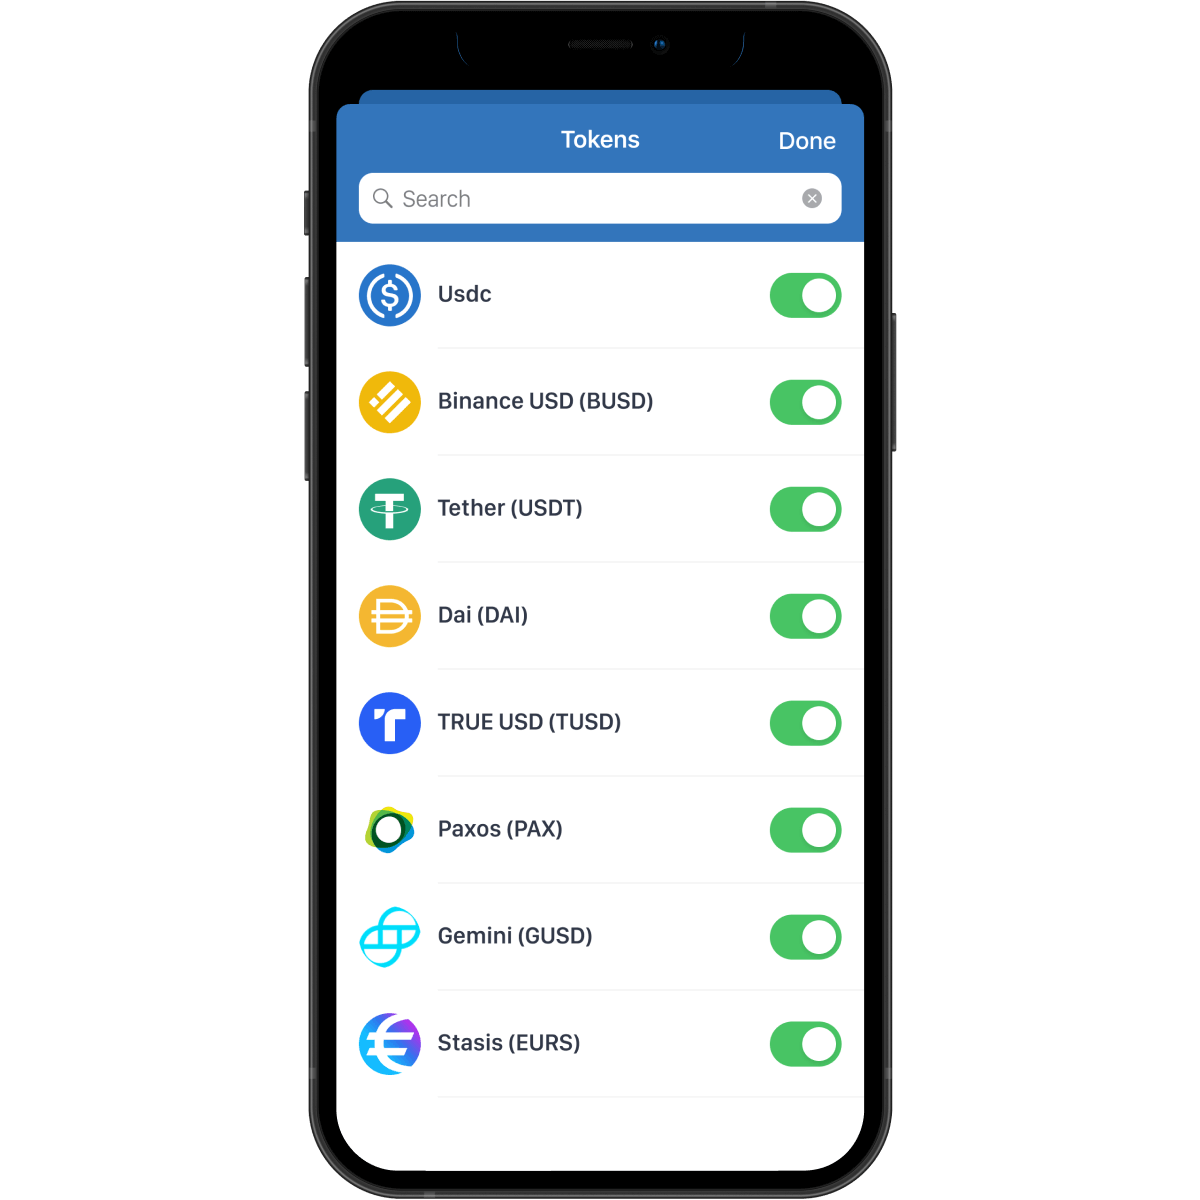 List of stablecoins you can use with Trust Wallet